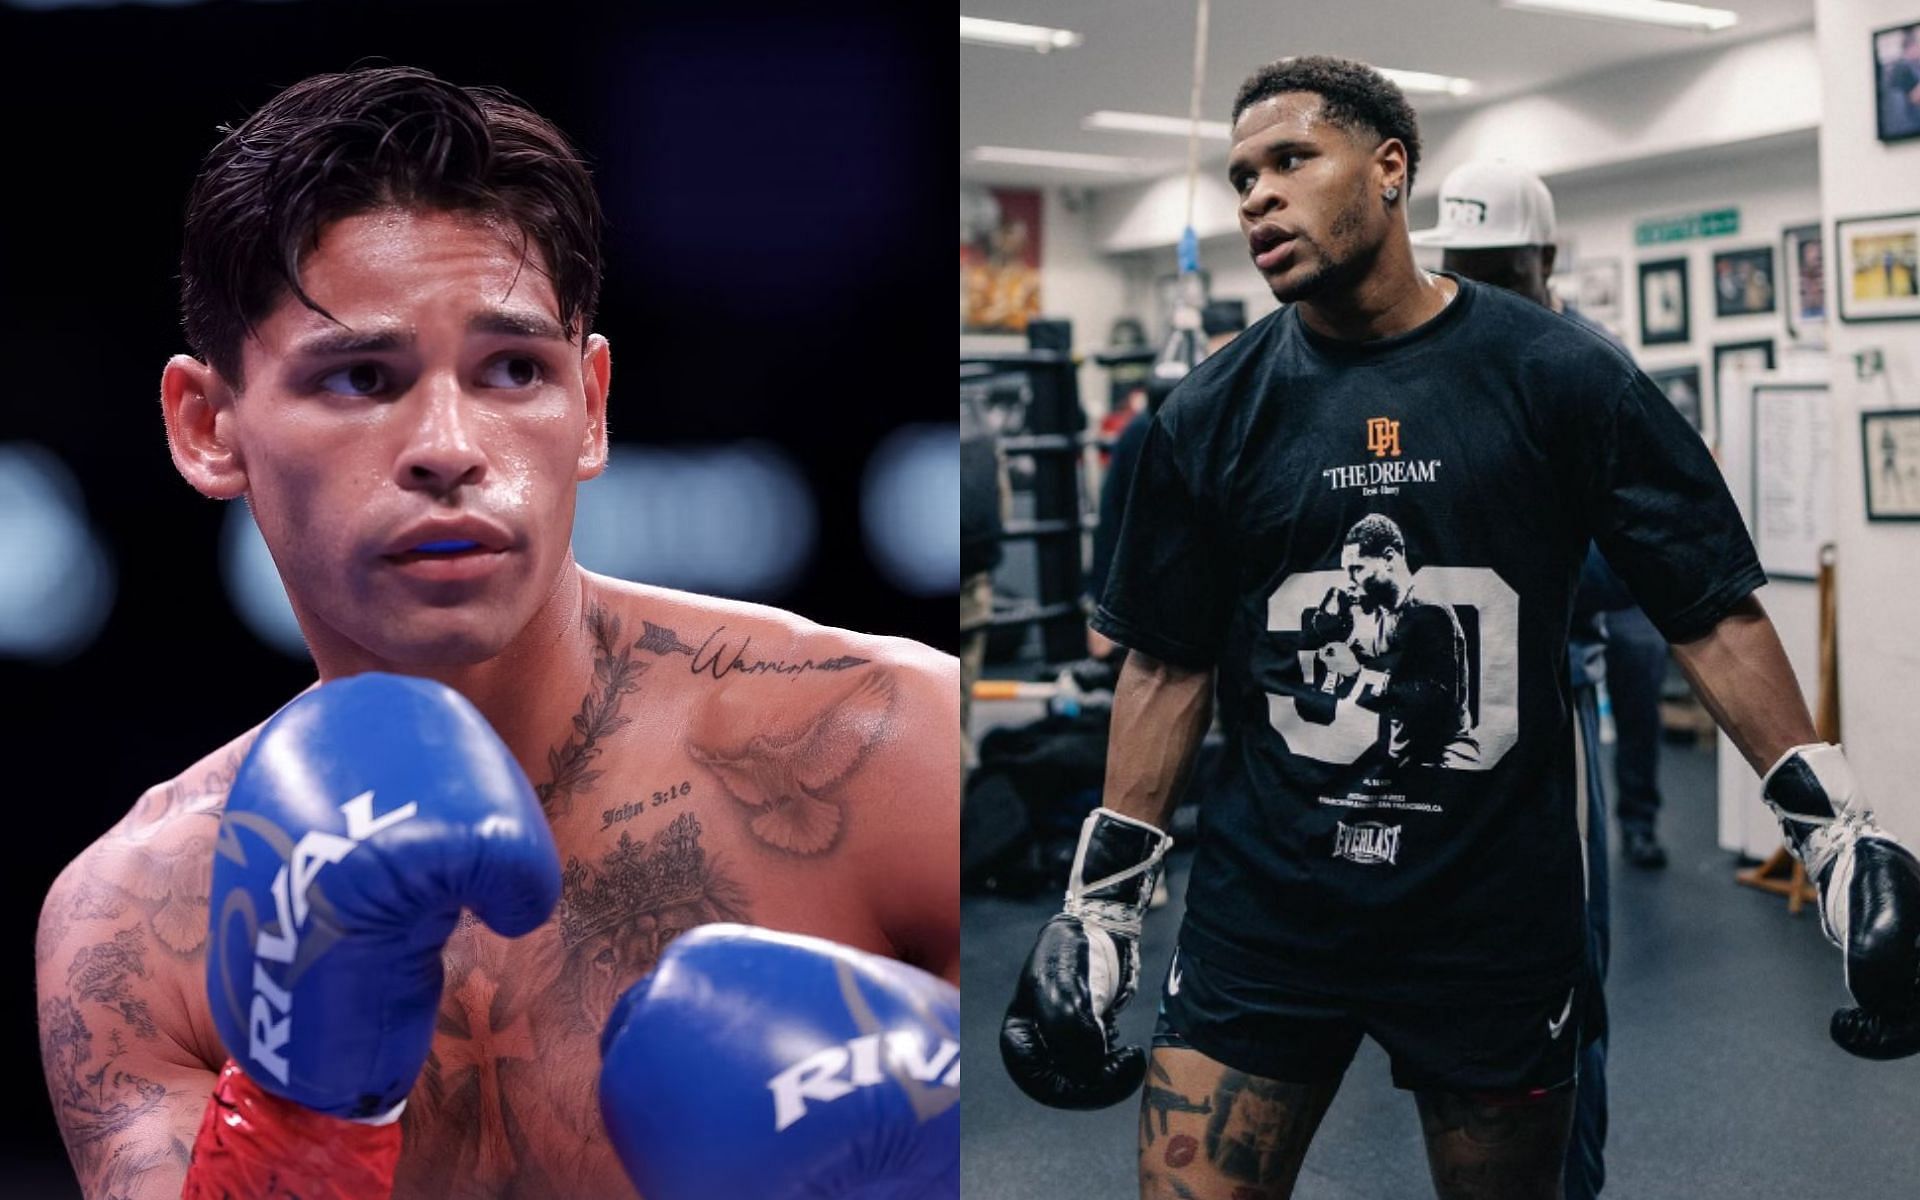 Devin Haney (right) fires back at Ryan Garcia (left) for recent comments ahead of their WBC title fight [Images Courtesy: @GettyImages, @realdevinhaney on Instagram]